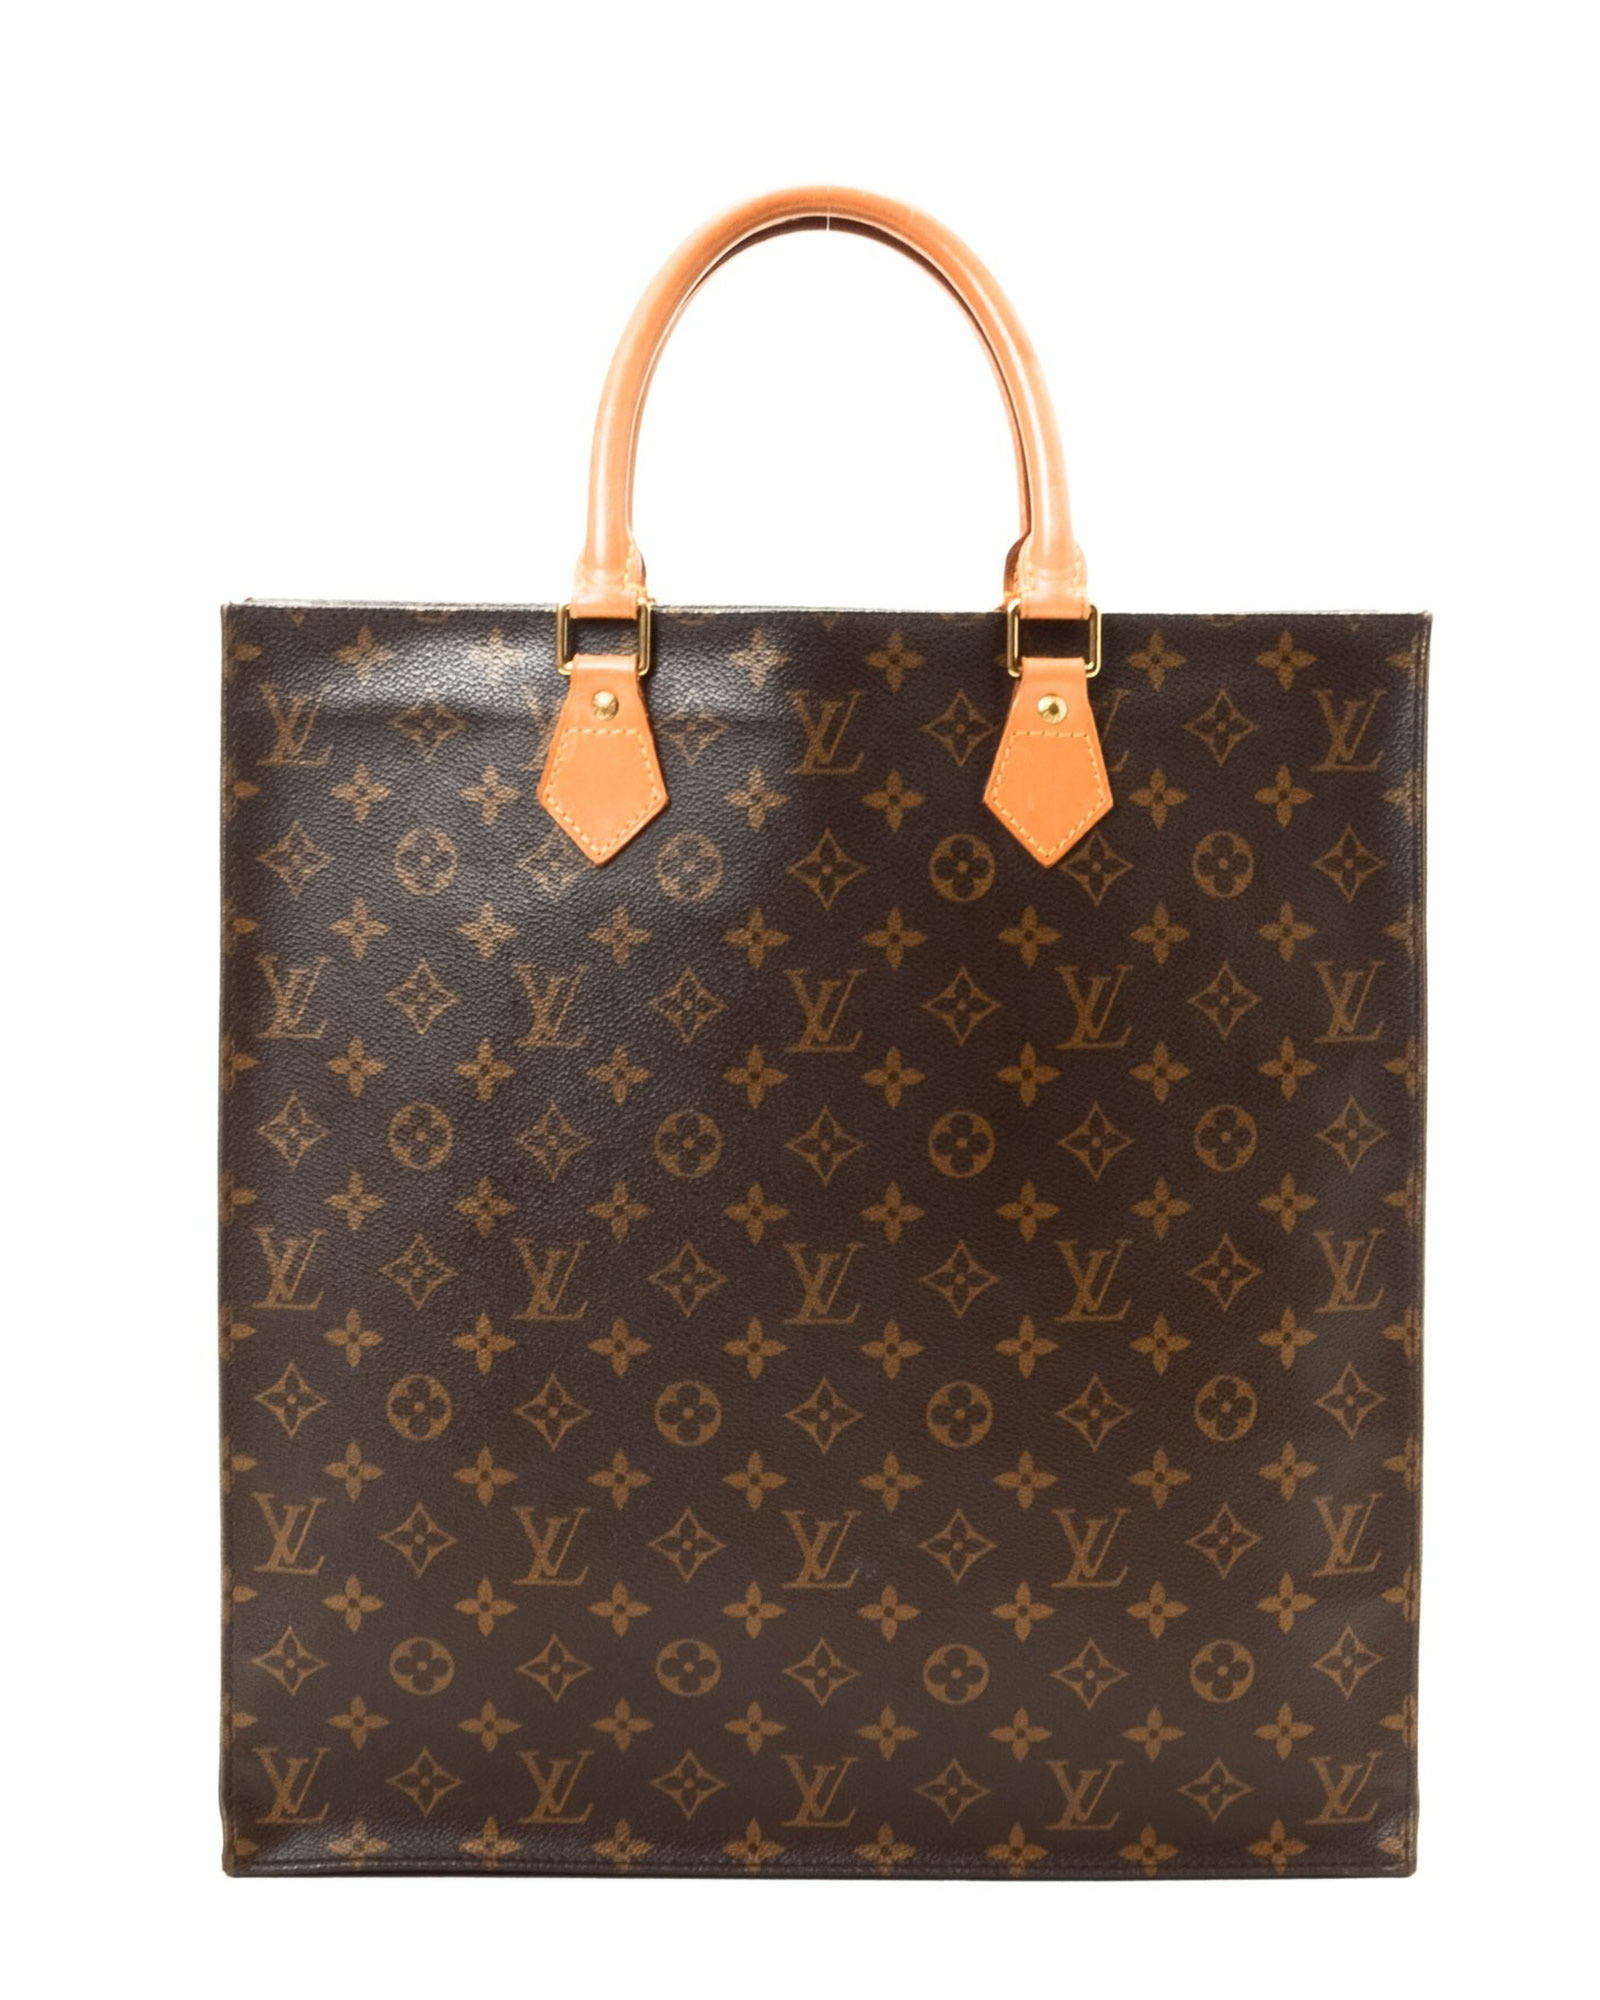 Lyst - Louis Vuitton Tote Bag in Brown